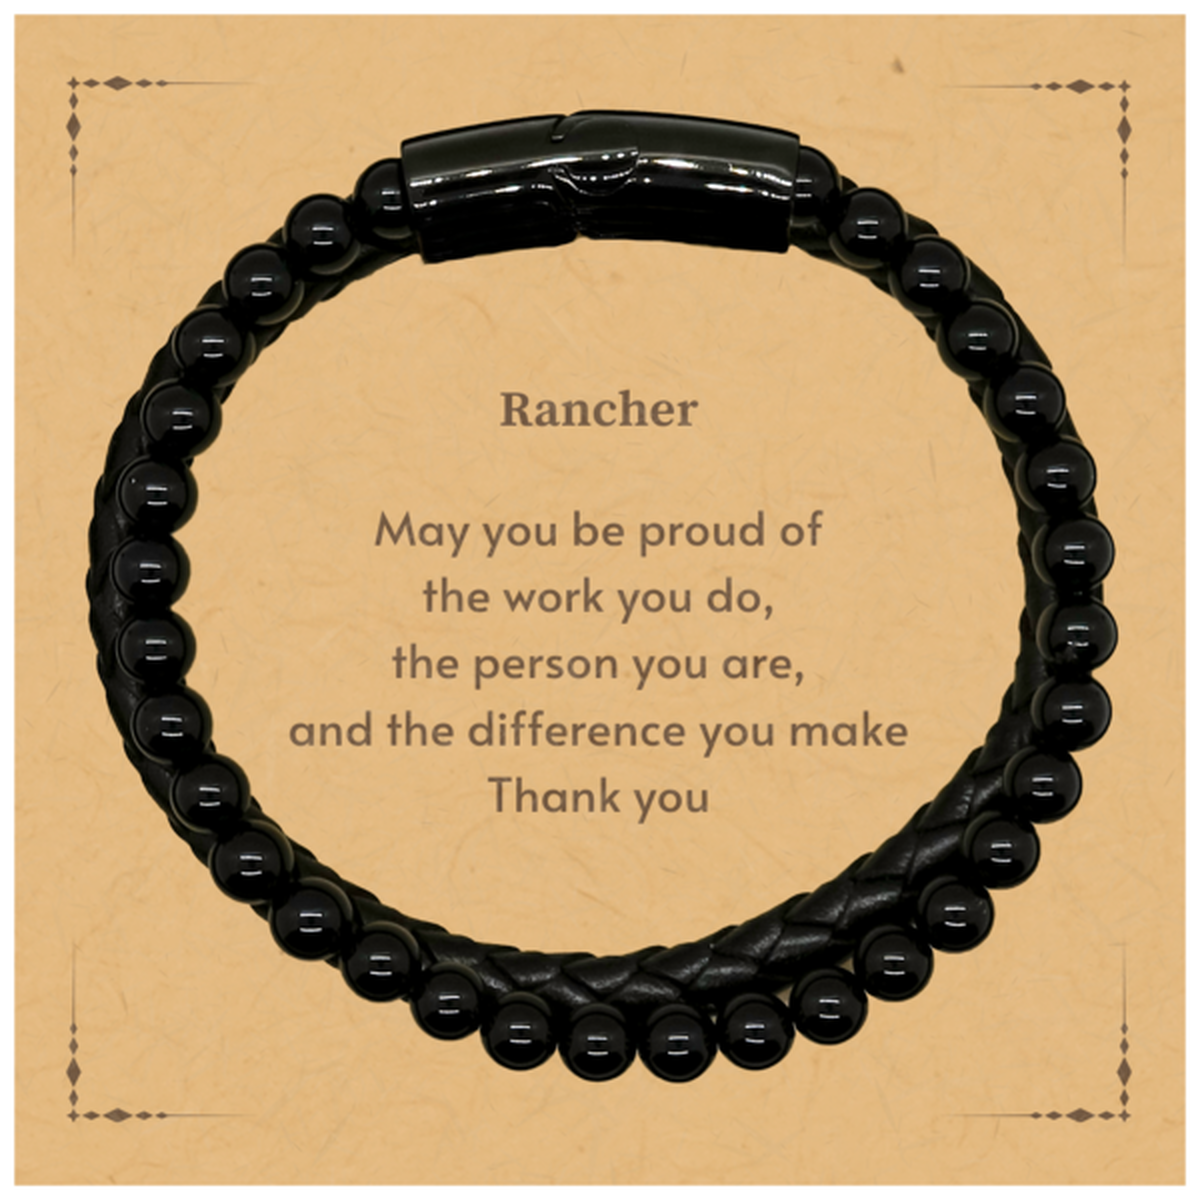 Heartwarming Stone Leather Bracelets Retirement Coworkers Gifts for Rancher, Rancher May You be proud of the work you do, the person you are Gifts for Boss Men Women Friends